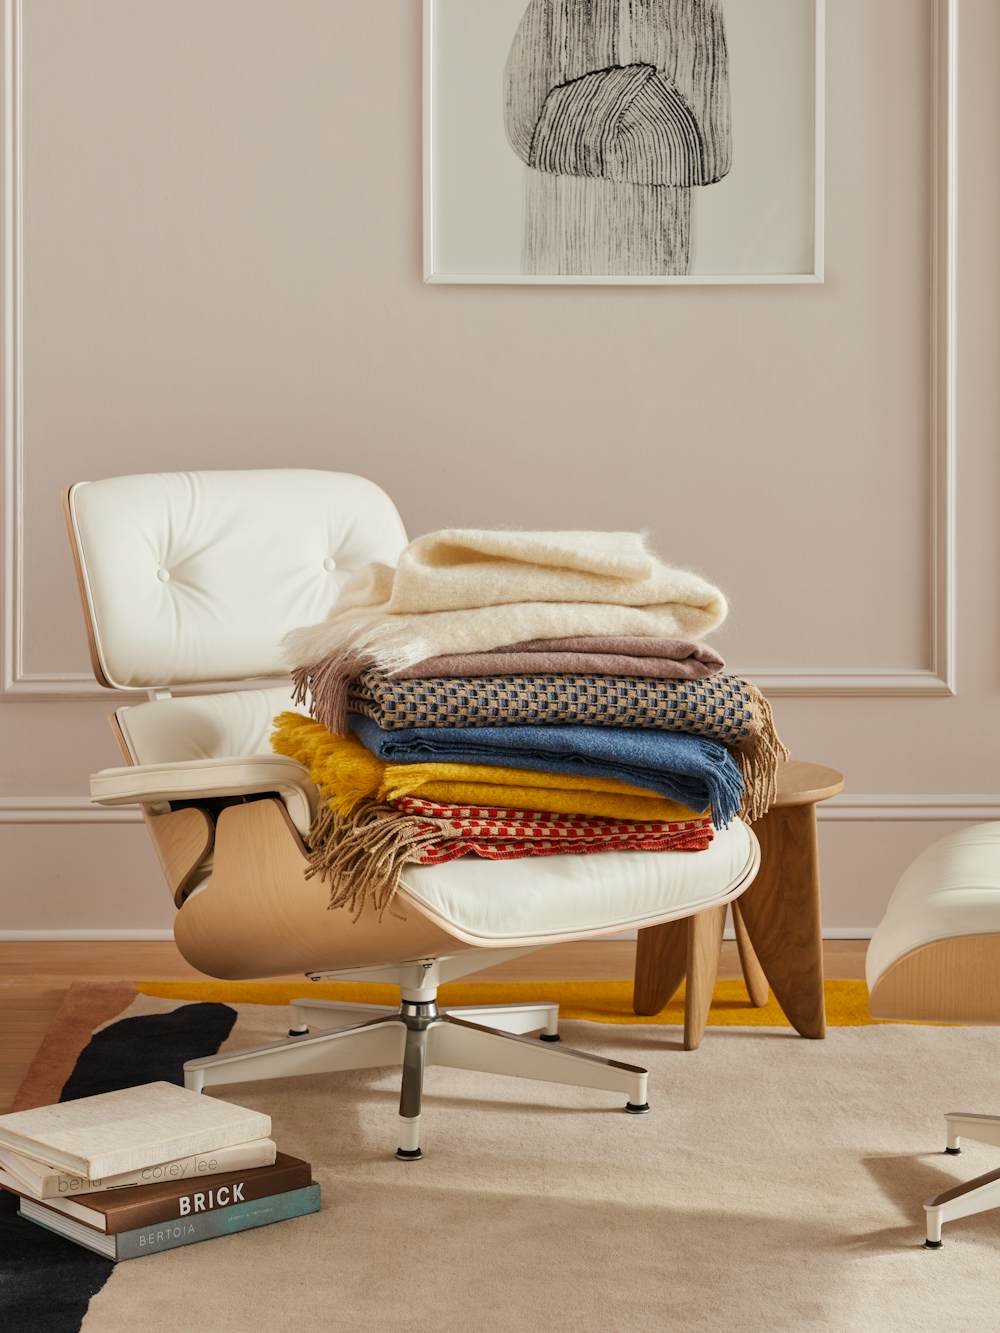 Eames Lounge Chair,  Avoca Throw,  Oona Alpaca Throw,  Drawing 9 Bouroullec